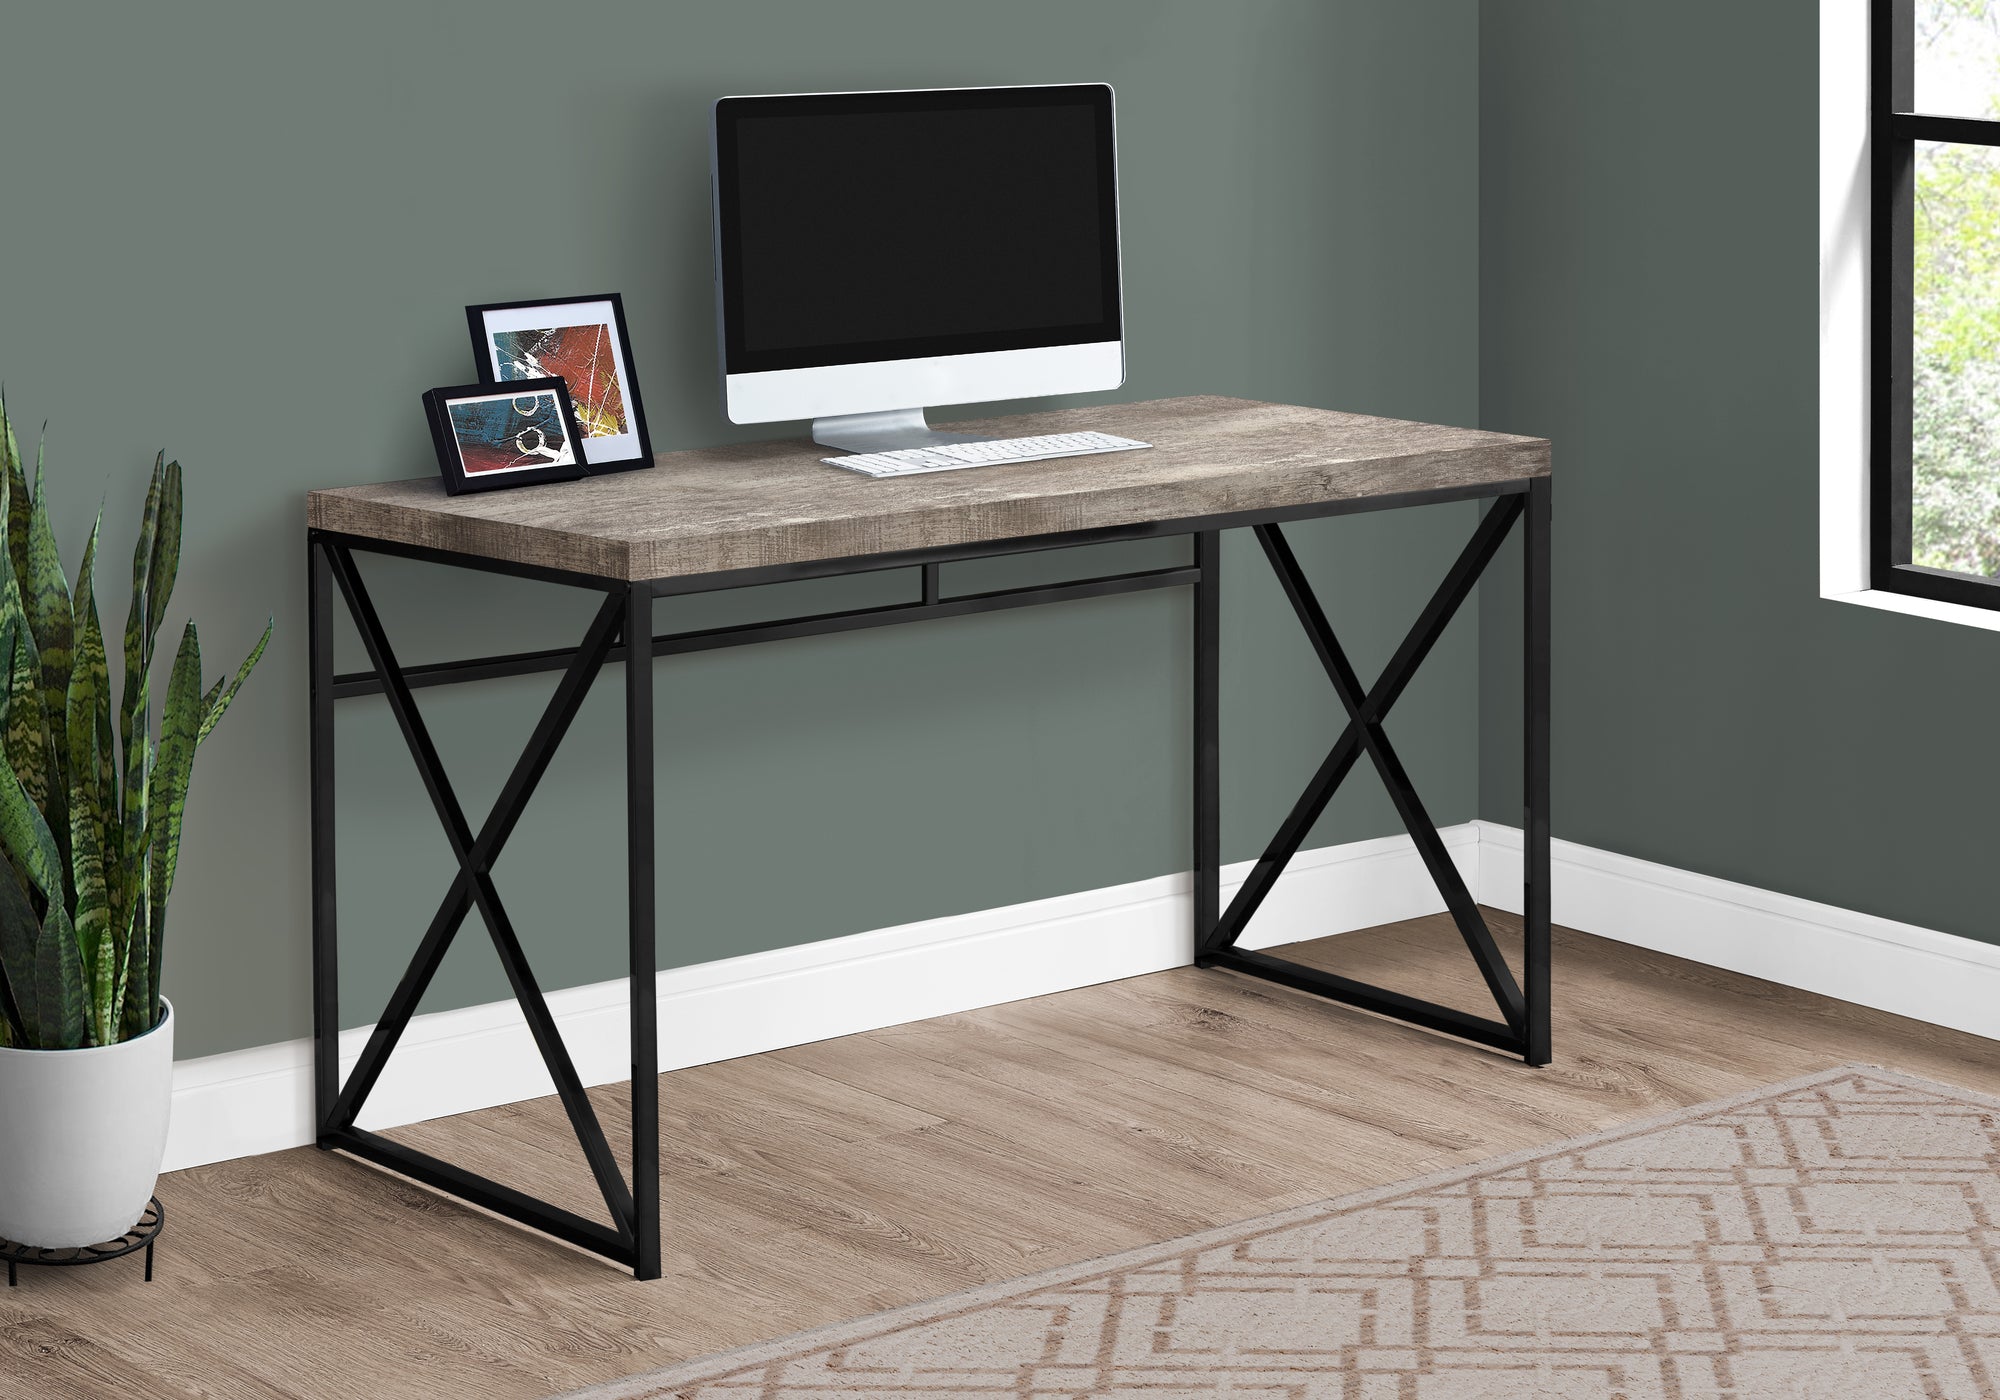 MN-207452    Computer Desk, Home Office, Laptop, Storage Drawers, Metal, Laminate, Taupe Reclaimed Wood Look, Black, Contemporary, Modern